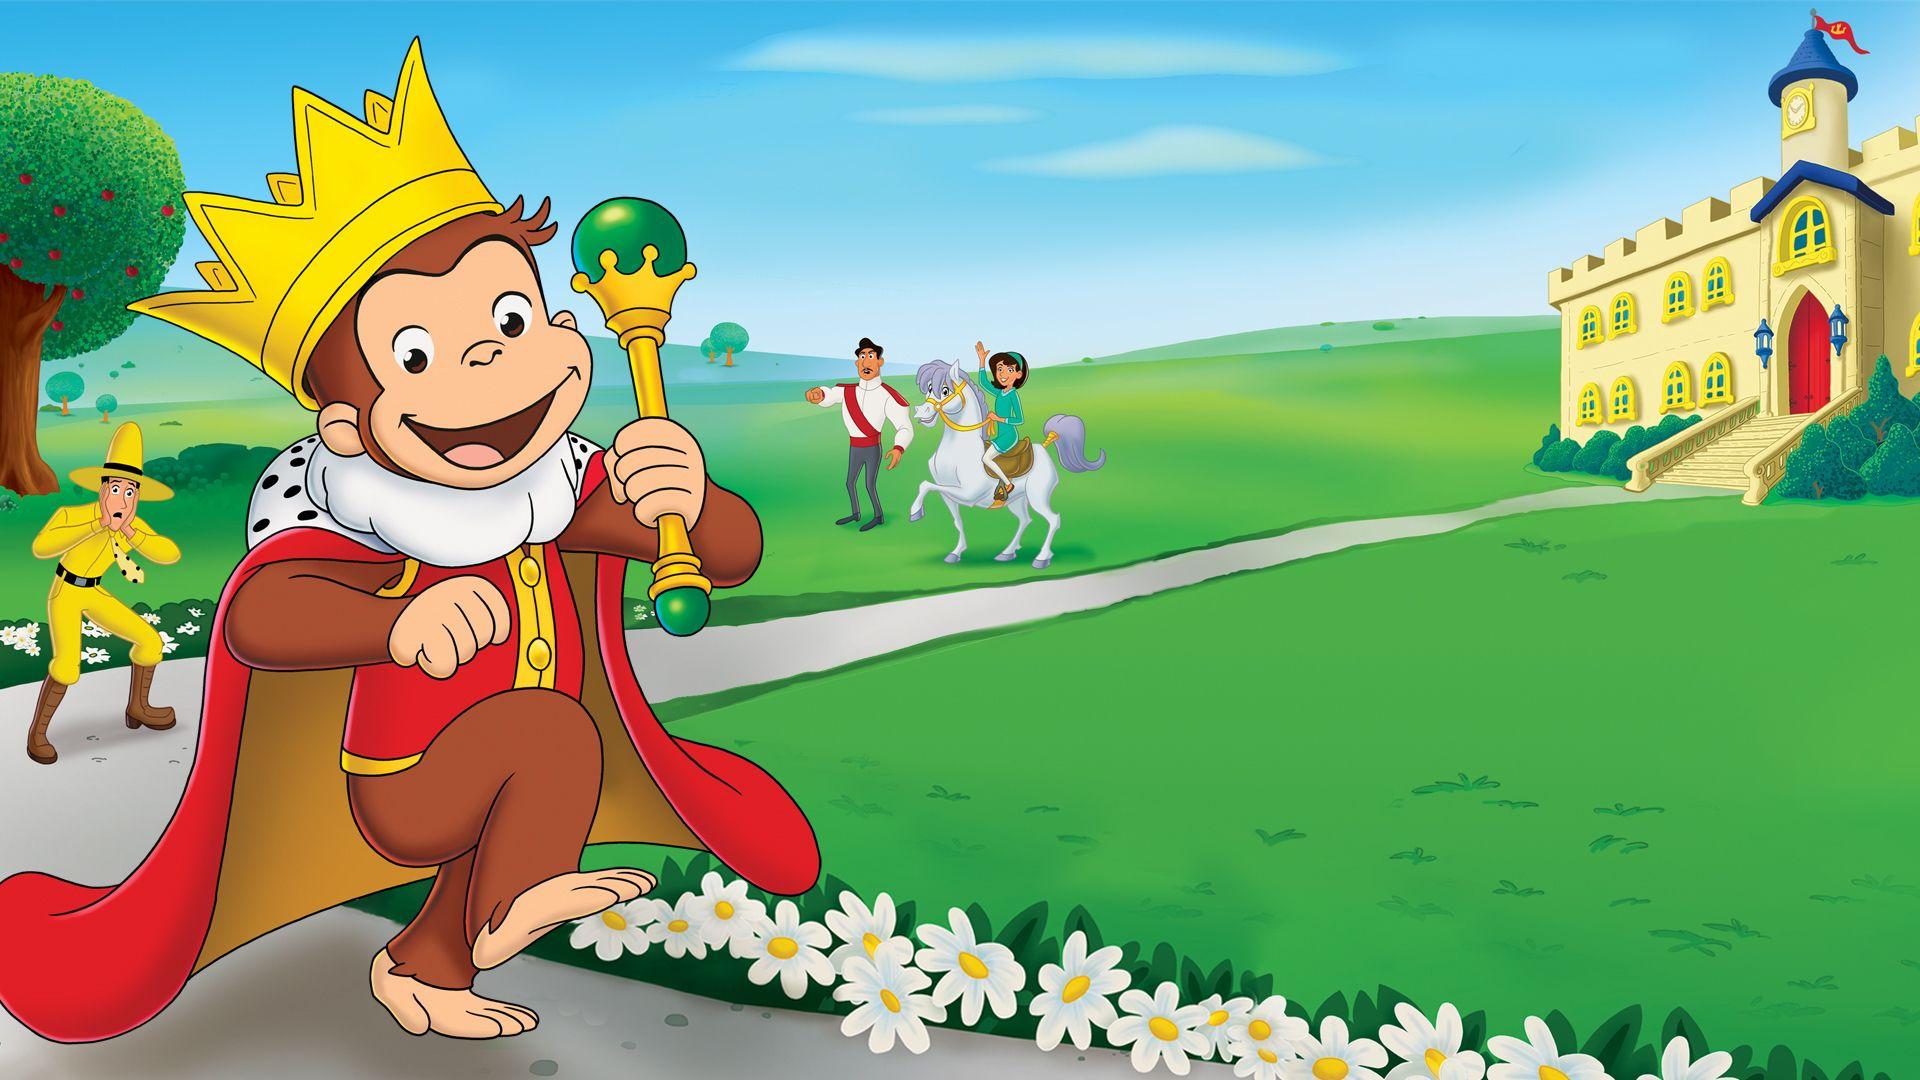 Watch Curious George Season 12 Episode 1 For Your Ice Only George and  the Unforgettable Fathers Day  Peacock